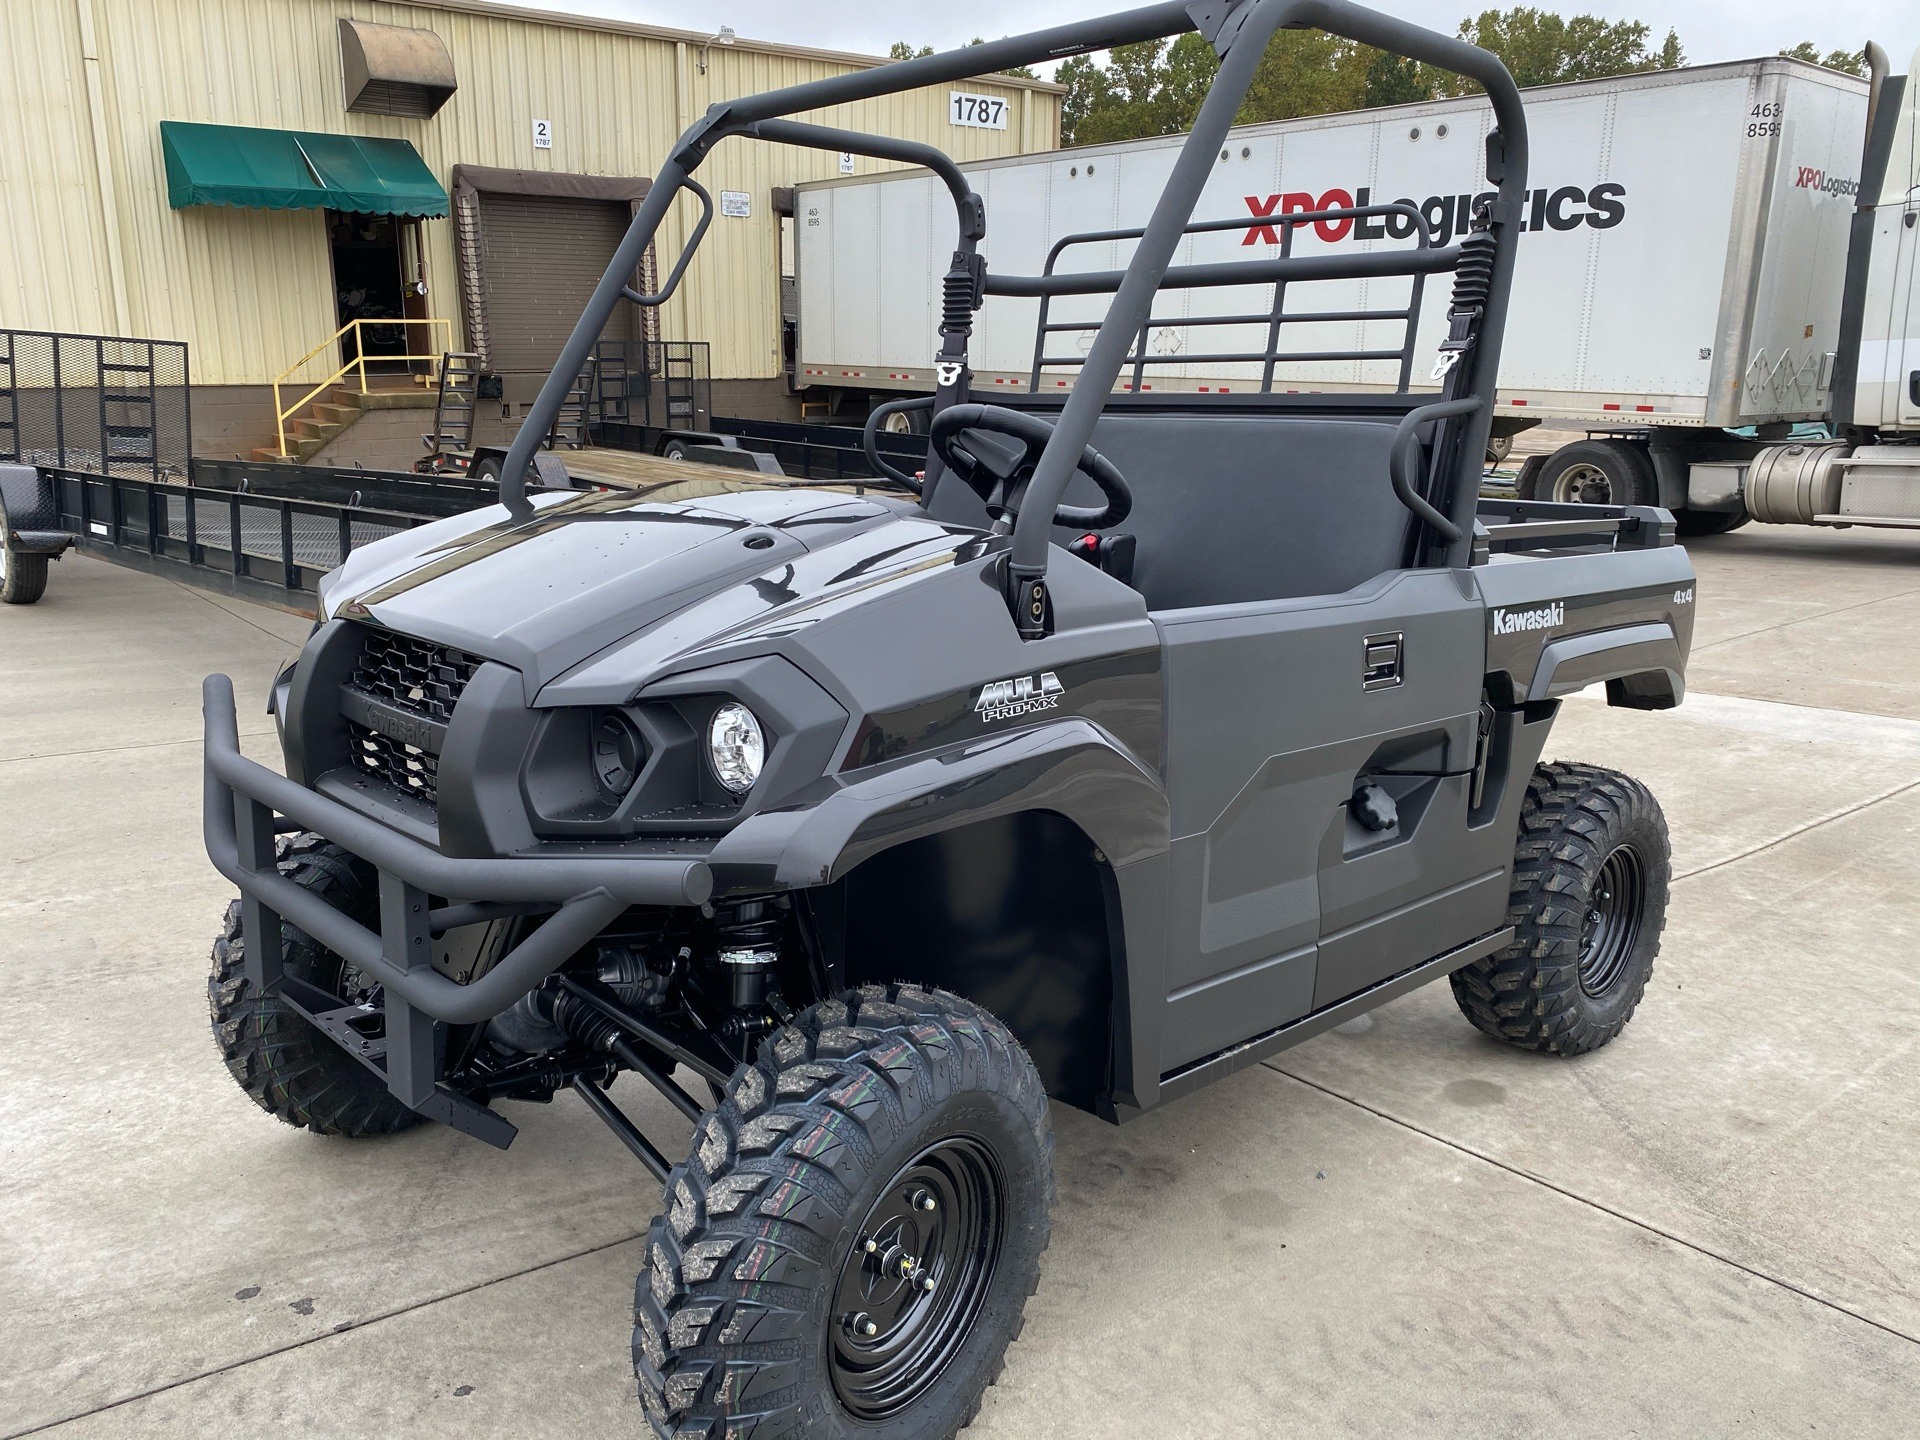 opdragelse Agurk behagelig New 2021 Kawasaki Mule PRO-MX Utility Vehicles in Statesville, NC | Stock  Number: 510584 - greatwesternmotorcycles.com